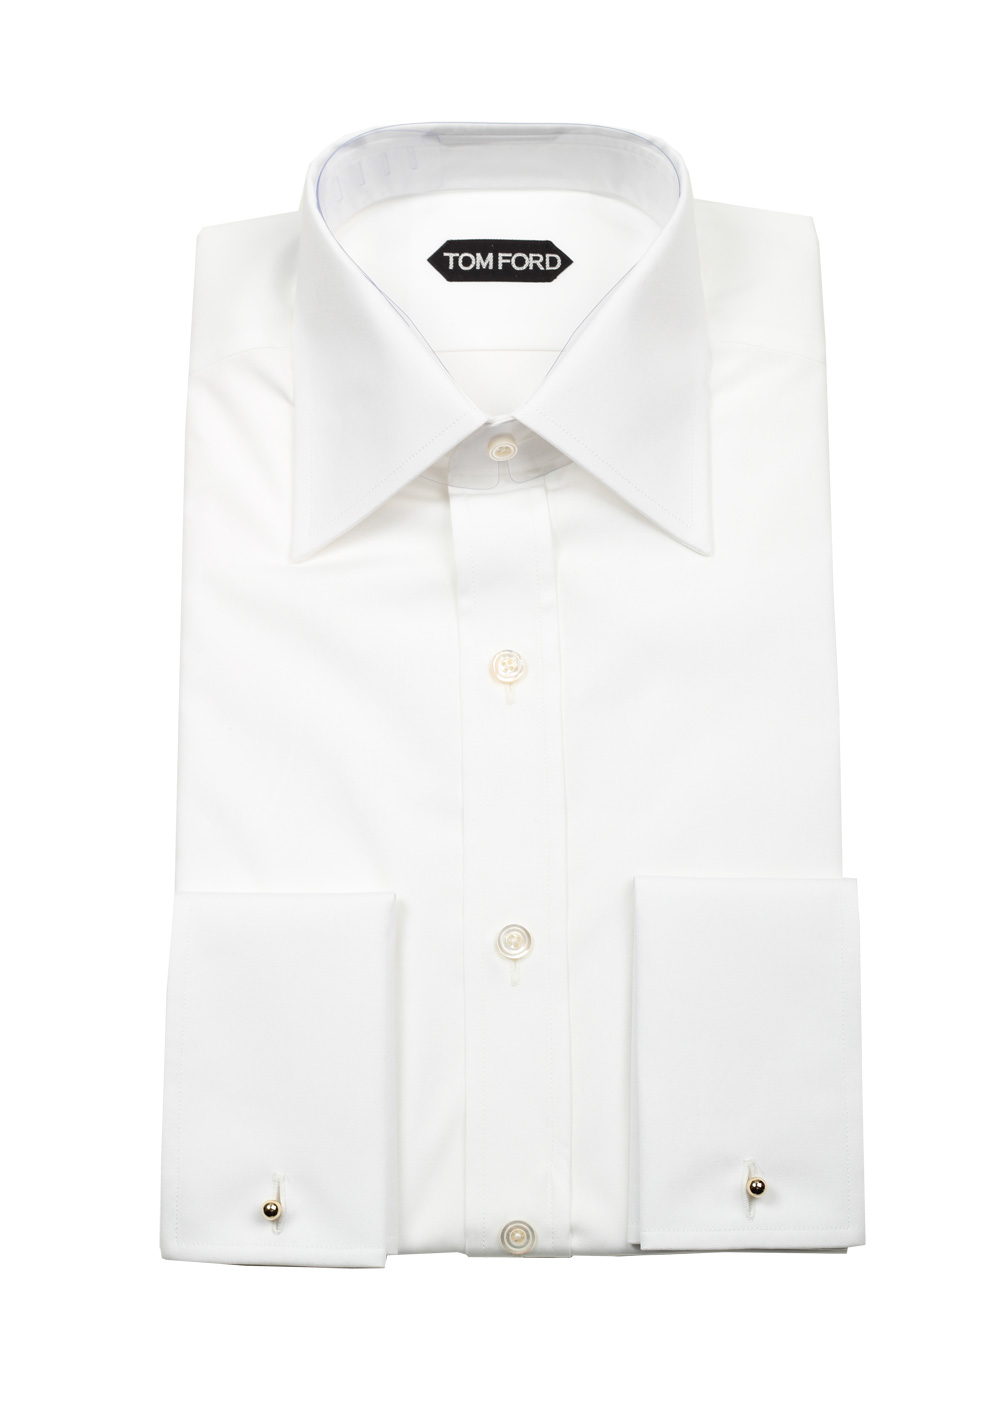 TOM FORD Solid White Signature Shirt With French Cuffs | Costume Limité